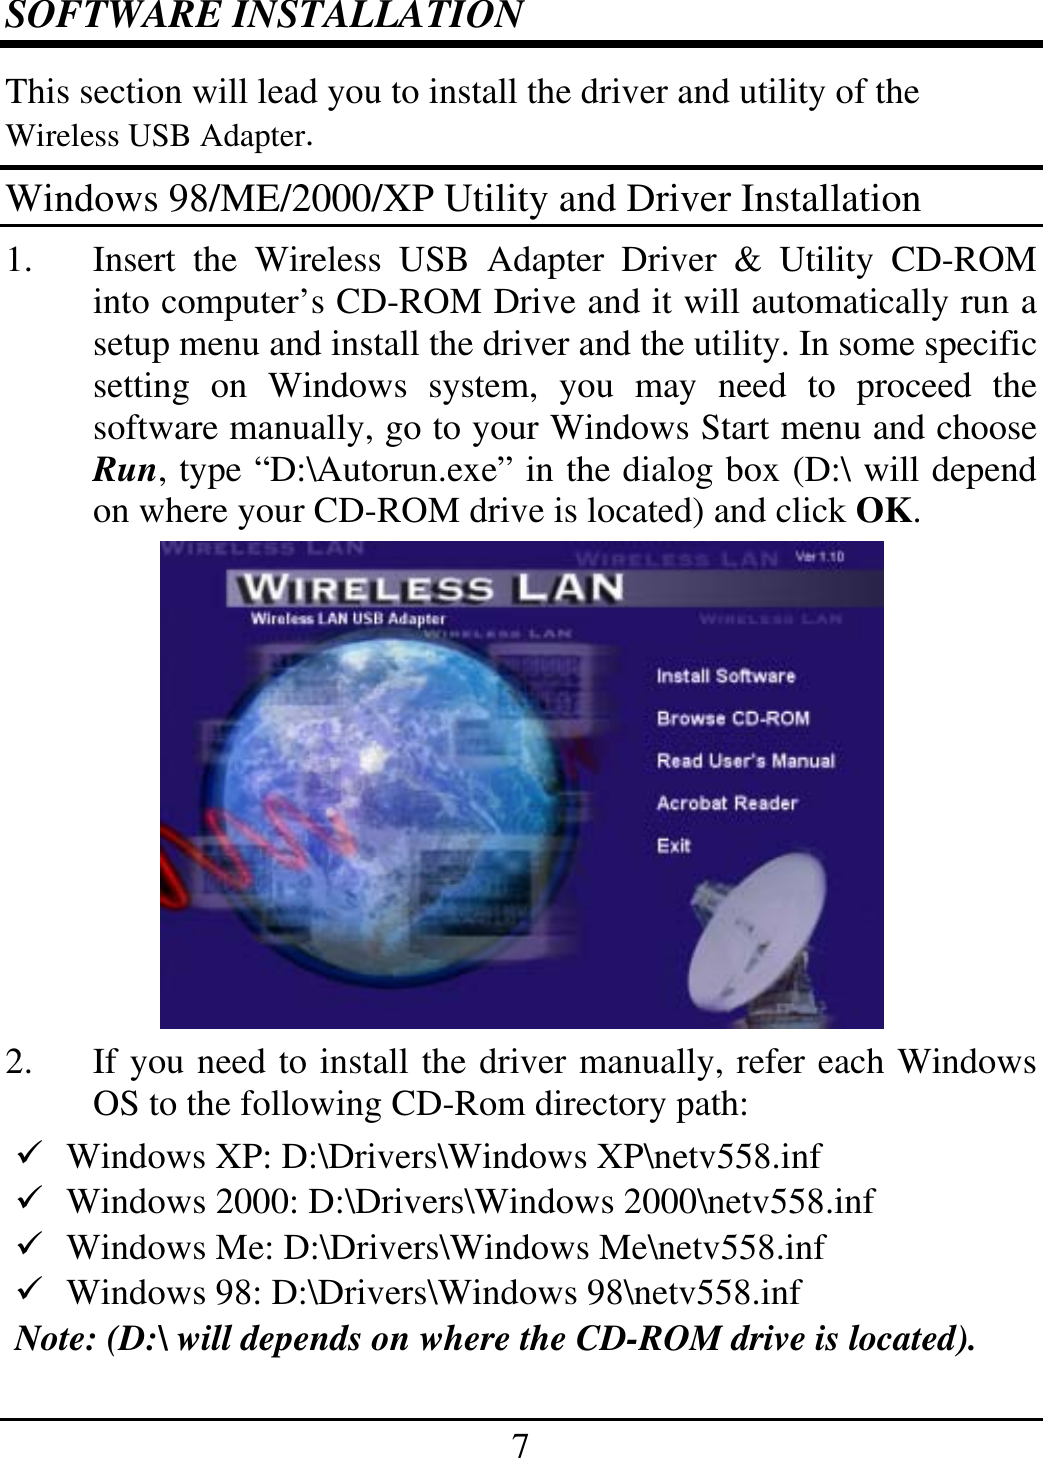 7 SOFTWARE INSTALLATION This section will lead you to install the driver and utility of the Wireless USB Adapter. Windows 98/ME/2000/XP Utility and Driver Installation 1.  Insert the Wireless USB Adapter Driver &amp; Utility CD-ROM into computer’s CD-ROM Drive and it will automatically run a setup menu and install the driver and the utility. In some specific setting on Windows system, you may need to proceed the software manually, go to your Windows Start menu and choose Run, type “D:\Autorun.exe” in the dialog box (D:\ will depend on where your CD-ROM drive is located) and click OK.  2.  If you need to install the driver manually, refer each Windows OS to the following CD-Rom directory path:  Windows XP: D:\Drivers\Windows XP\netv558.inf   Windows 2000: D:\Drivers\Windows 2000\netv558.inf   Windows Me: D:\Drivers\Windows Me\netv558.inf   Windows 98: D:\Drivers\Windows 98\netv558.inf  Note: (D:\ will depends on where the CD-ROM drive is located). 